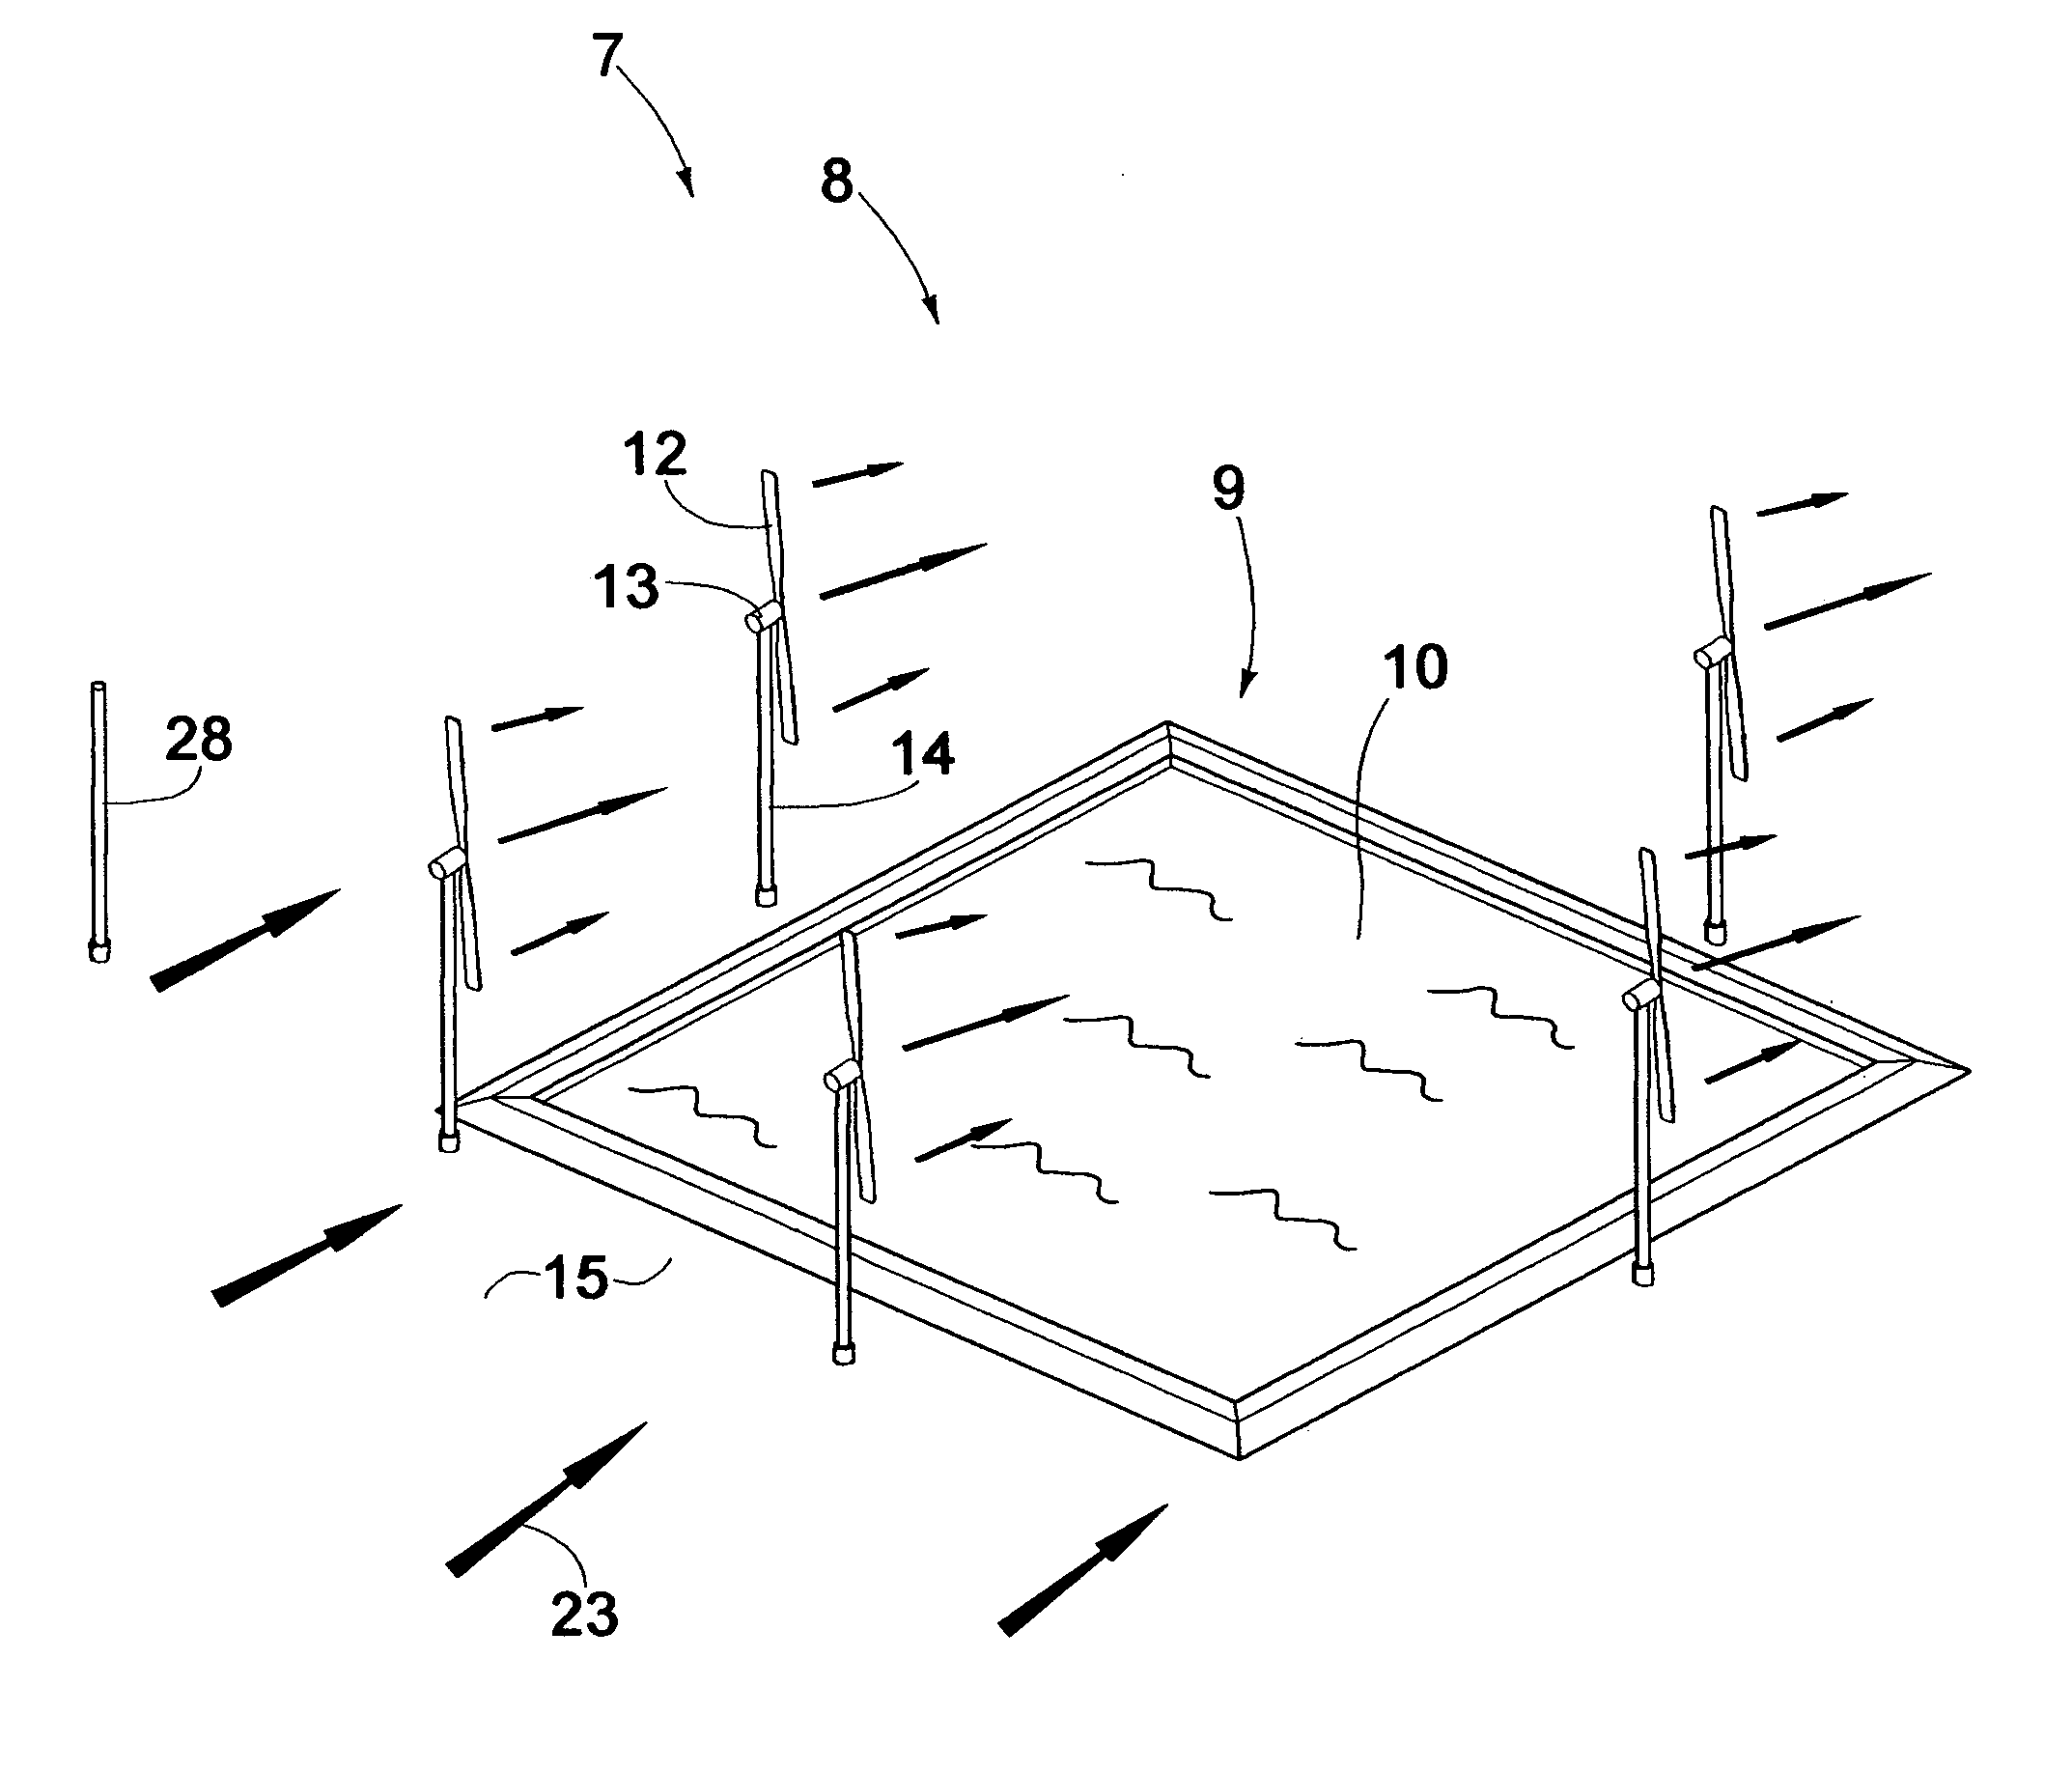 Method for siting and operating an odor dispersing wind machine array